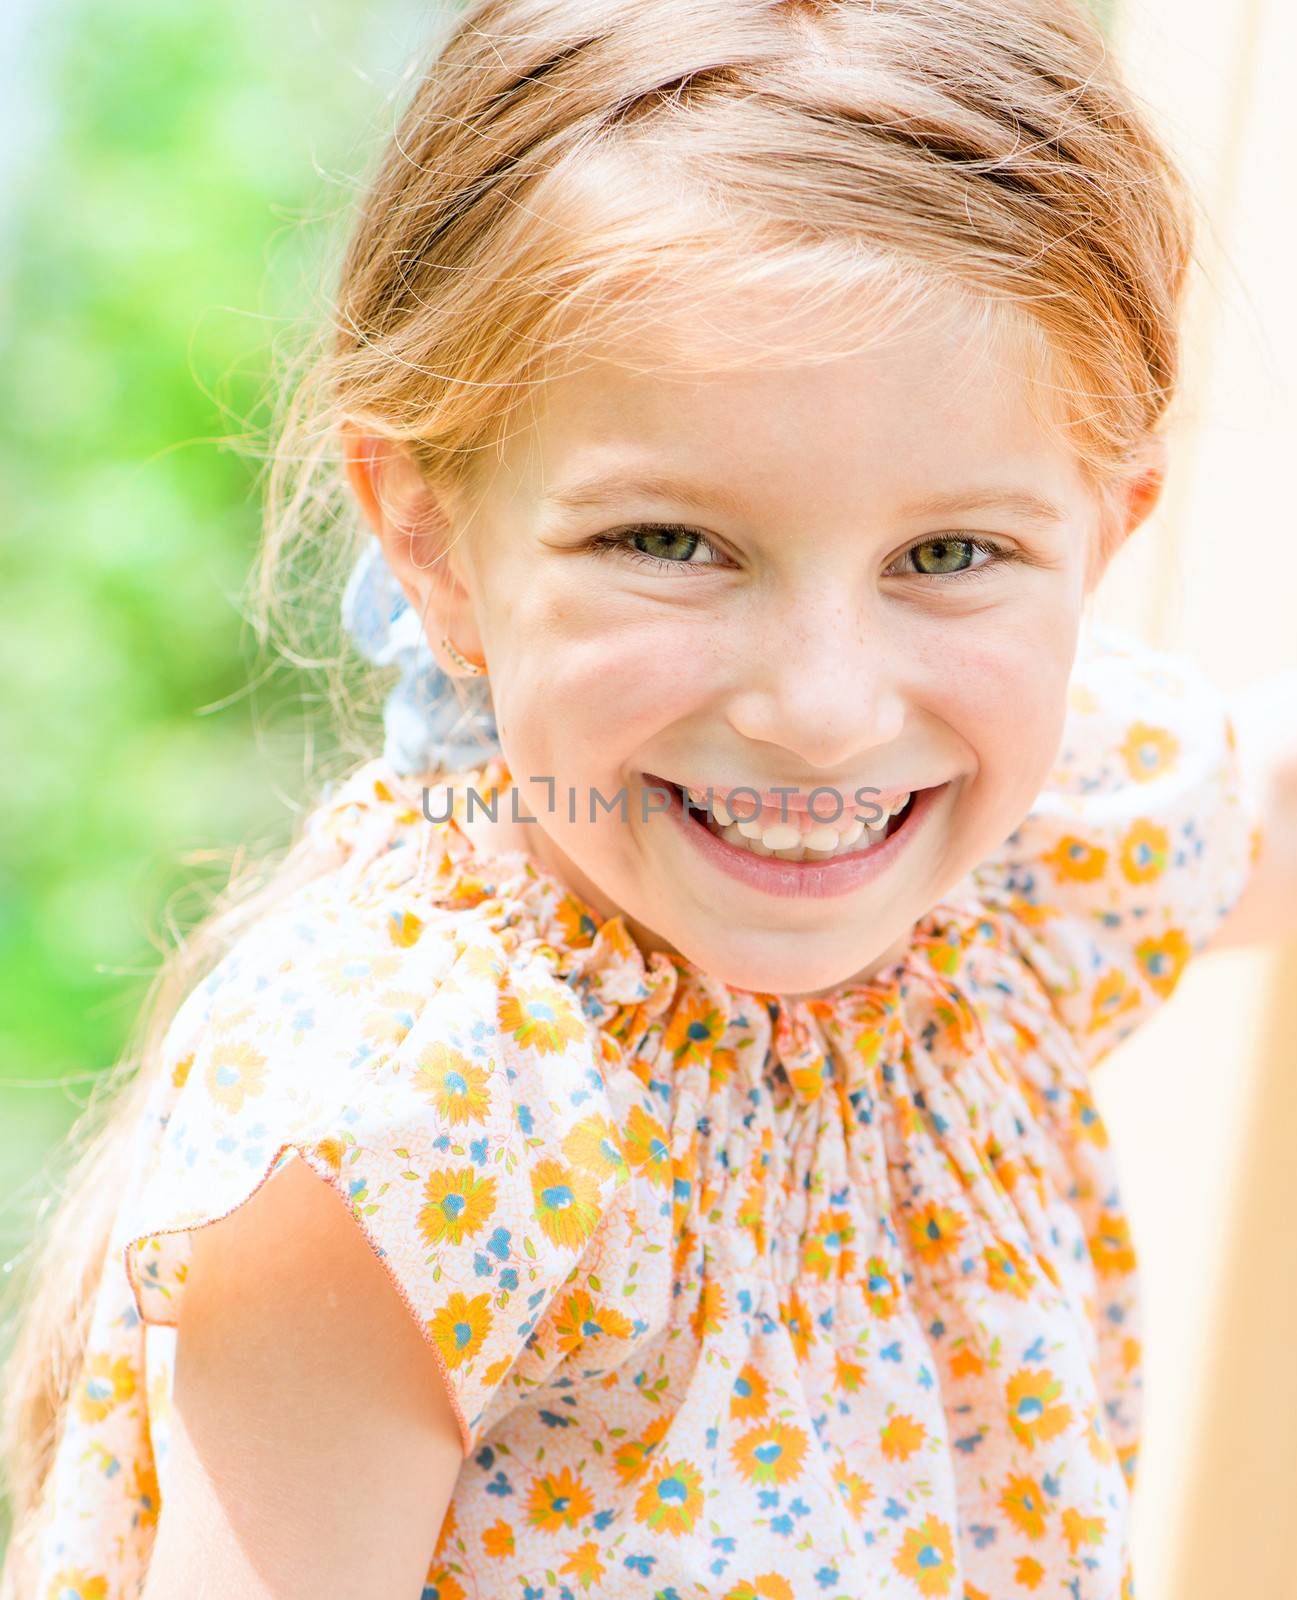 portrait of a cute smiling little girl